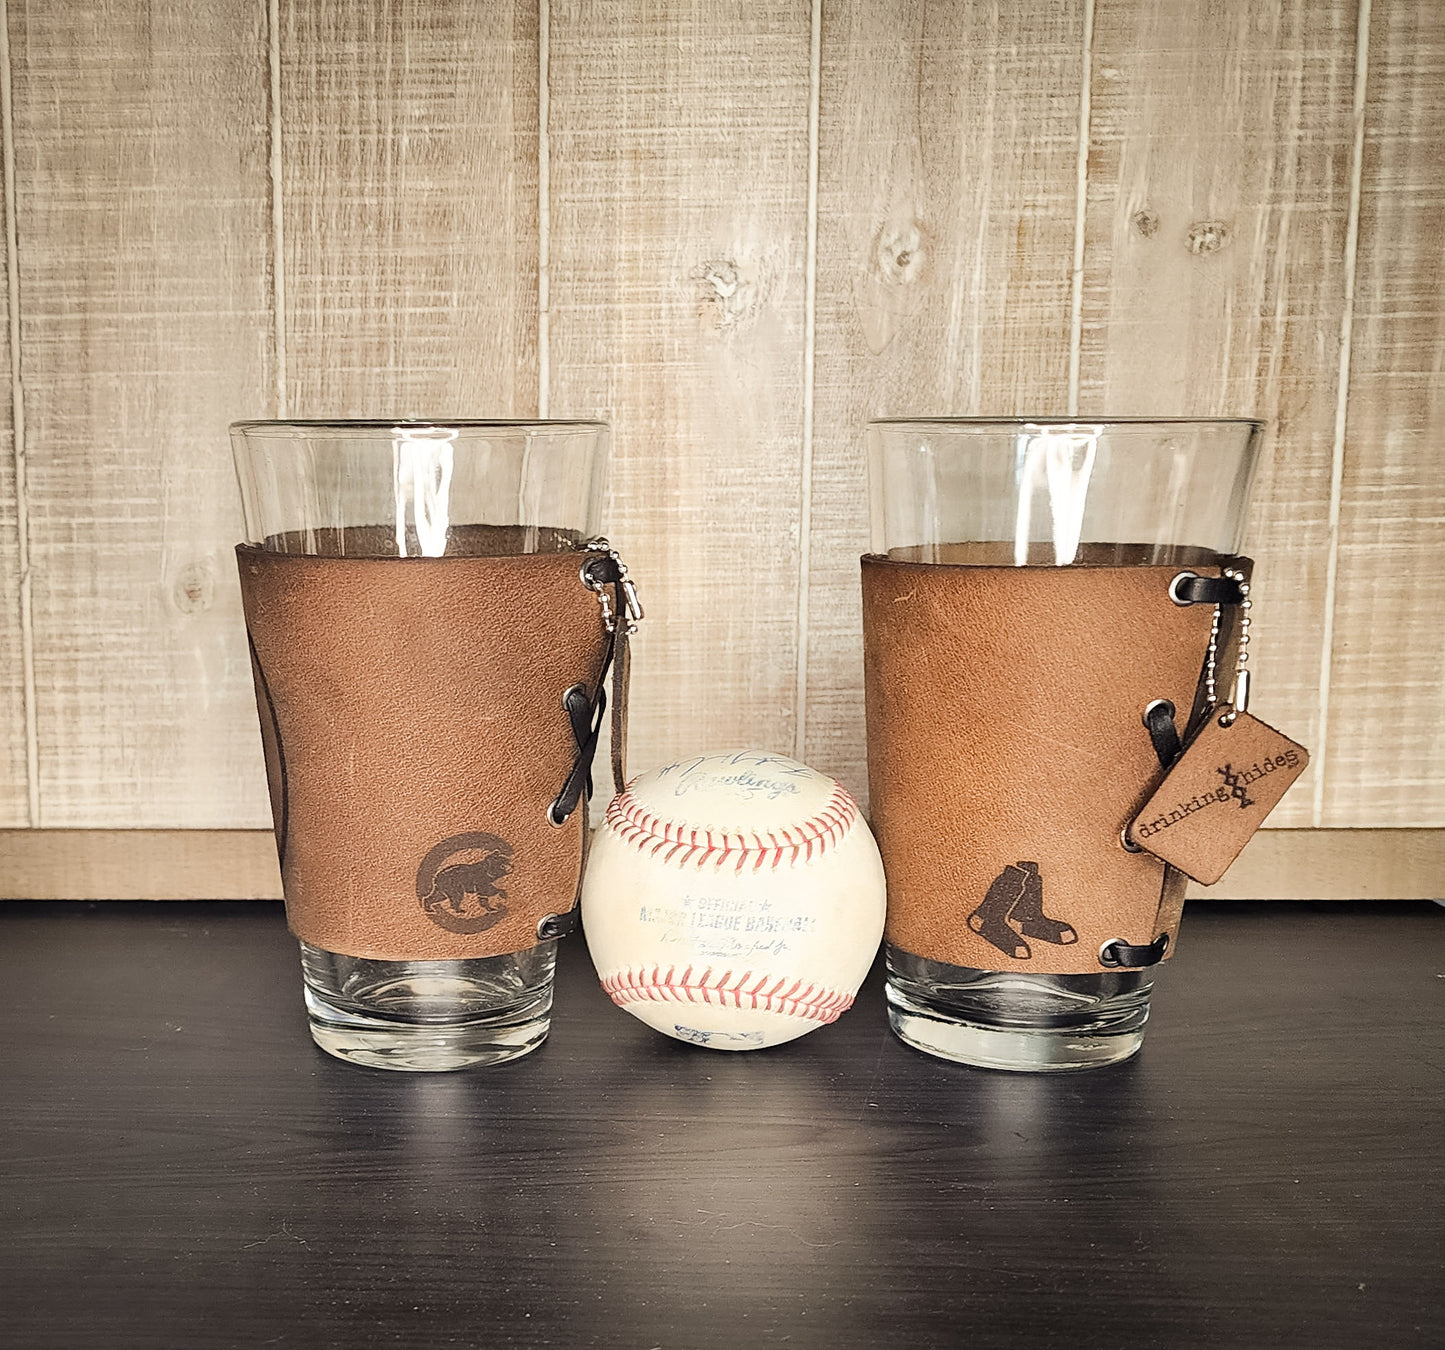 Premium leather baseball coozie | Personalized mens birthday gift | Men's birthday gift ideas | Baseball gifts for men